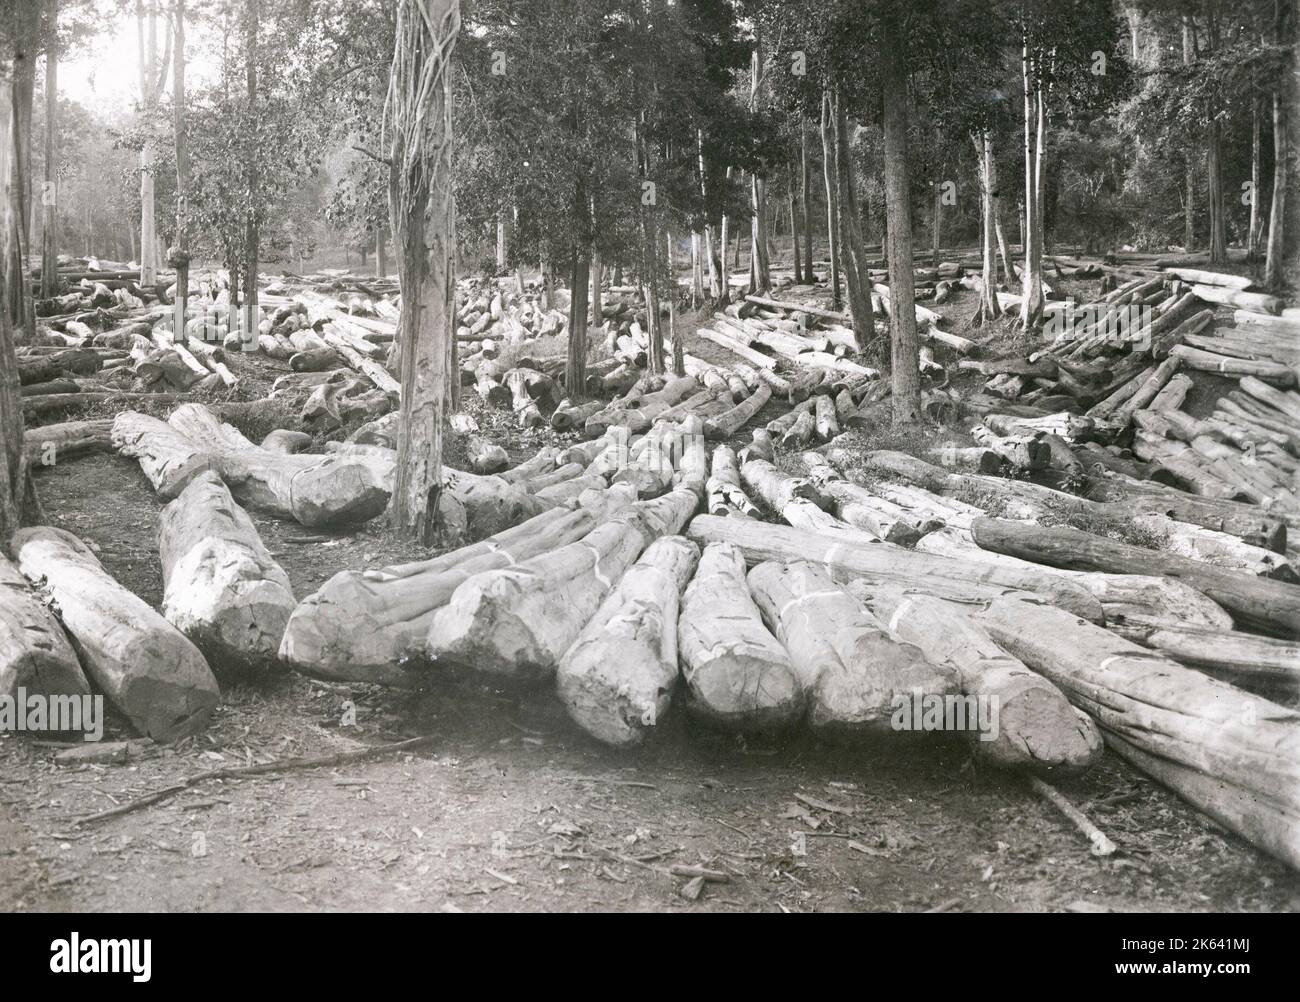 Timber logging forestry in Burma c. early 20th century. Stock Photo